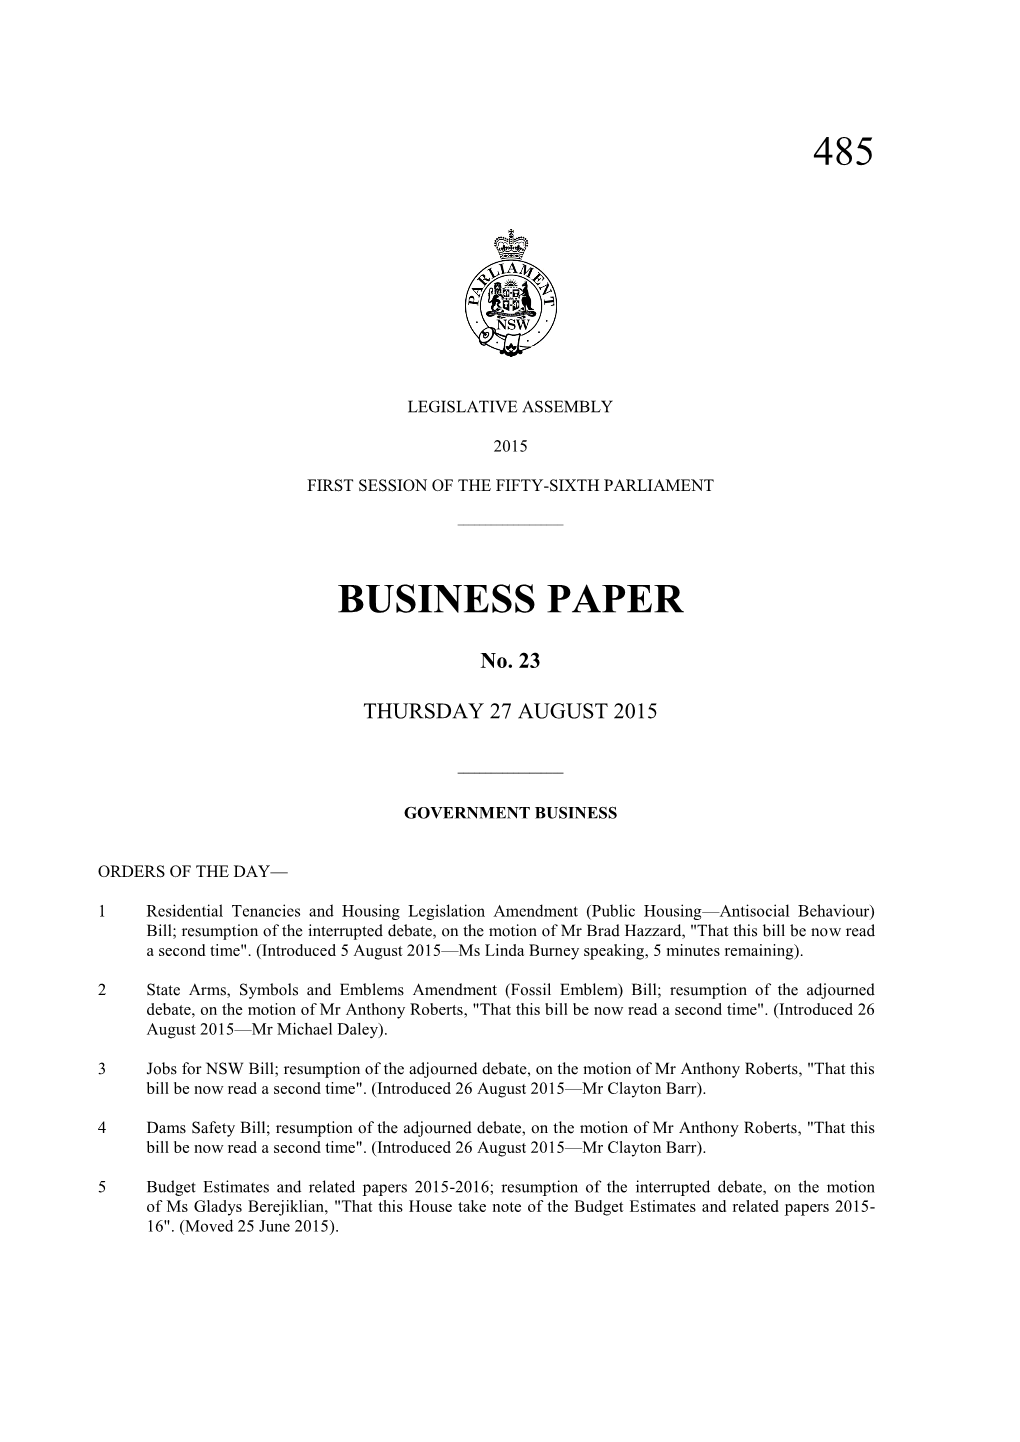 485 Business Paper